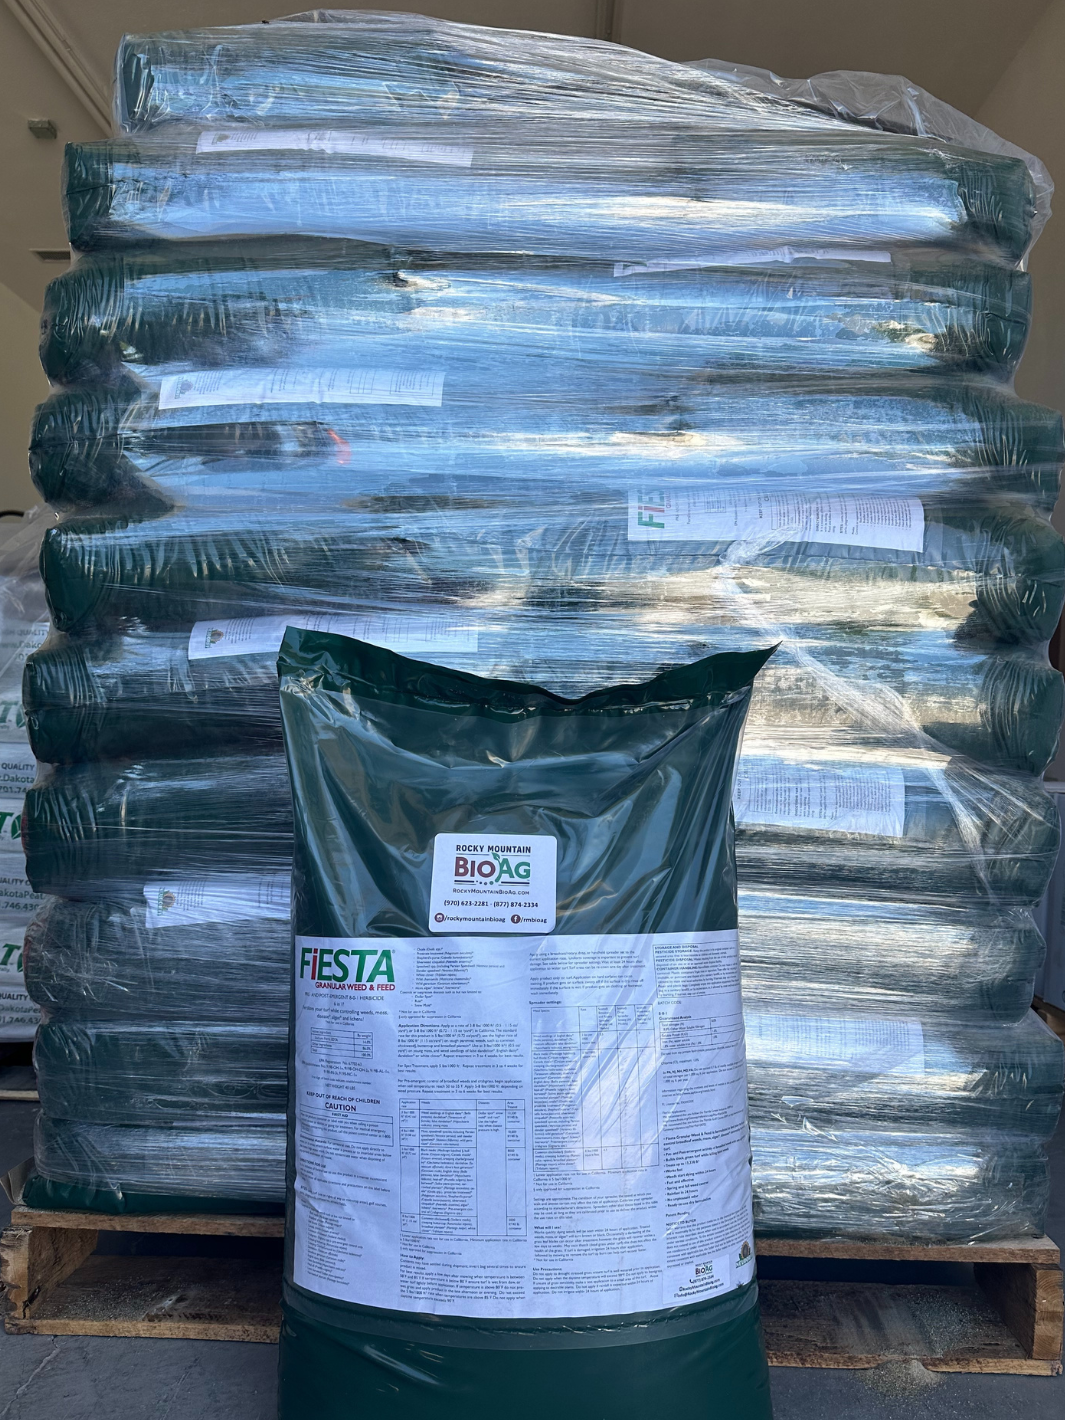 Full Pallet of Fieasta Granular Weed and Feed